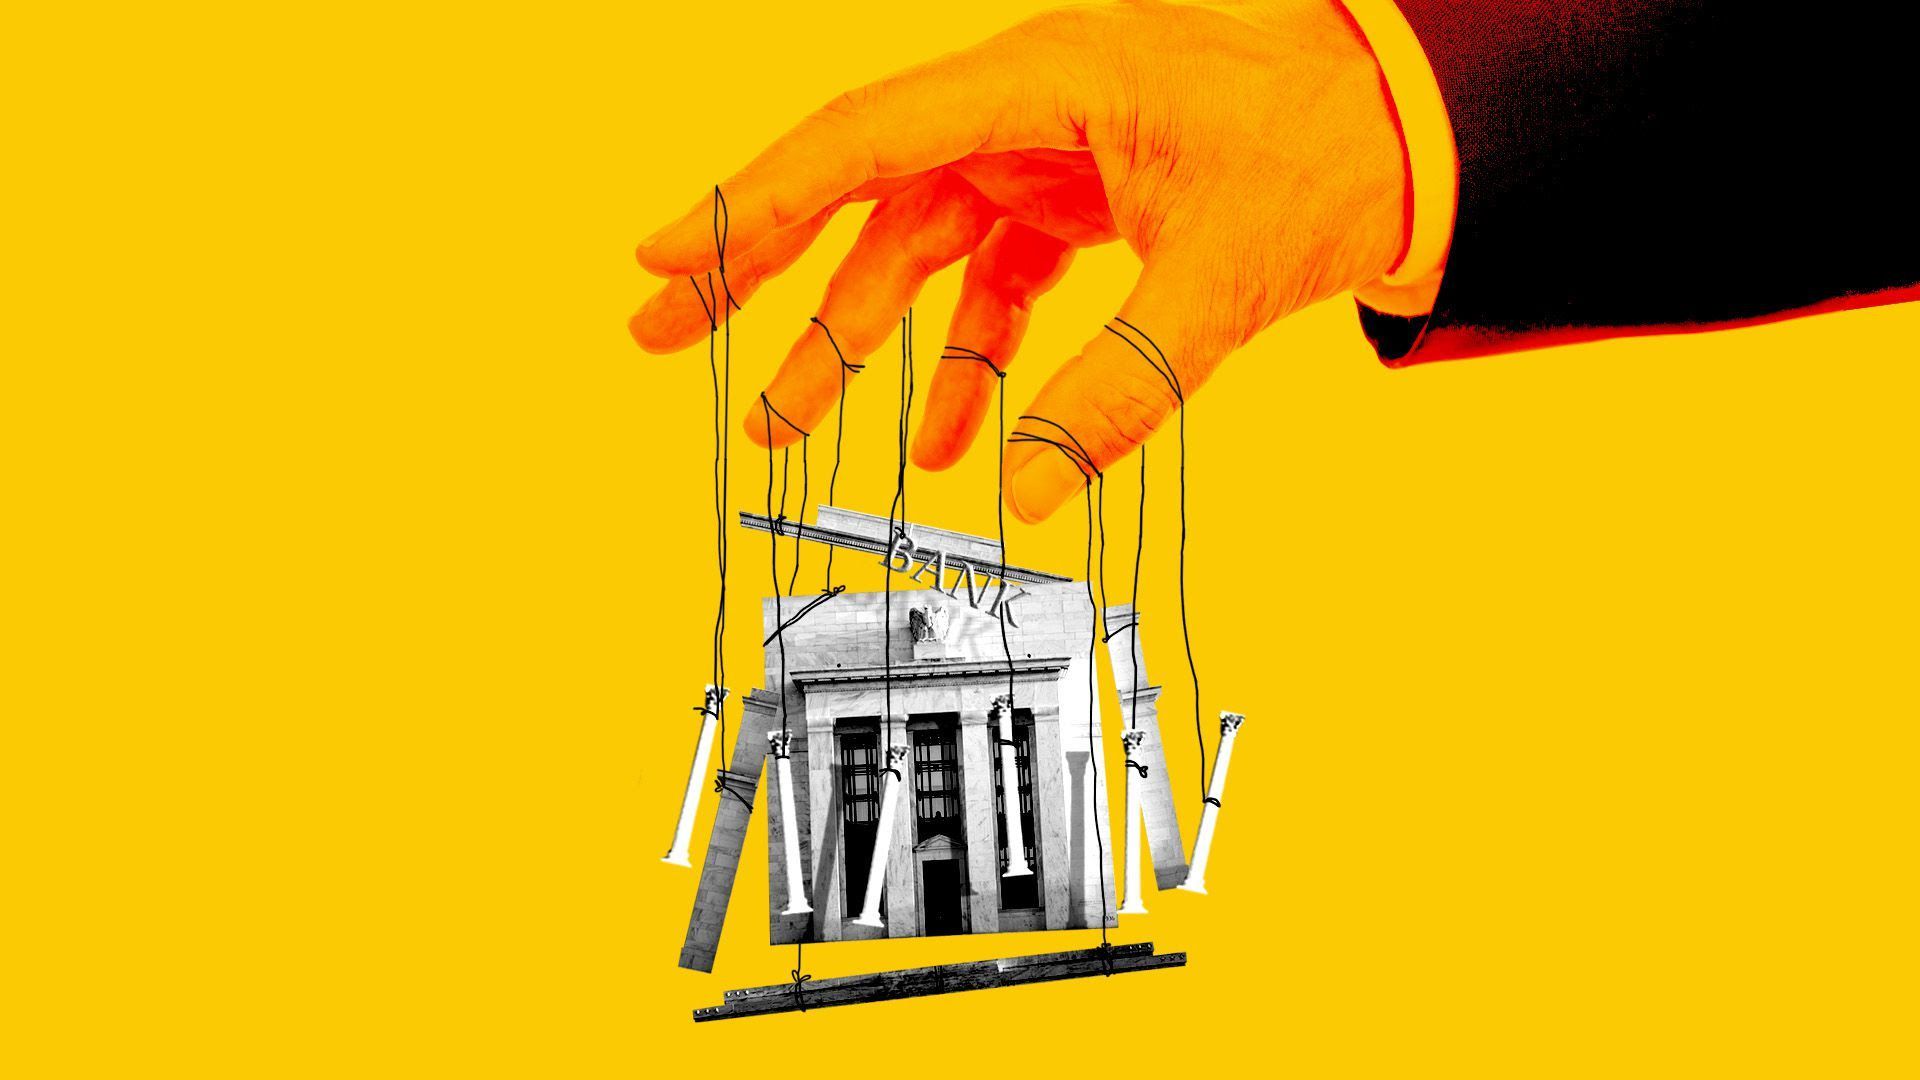 Illustration of a hand pulling a bank like a puppeteer